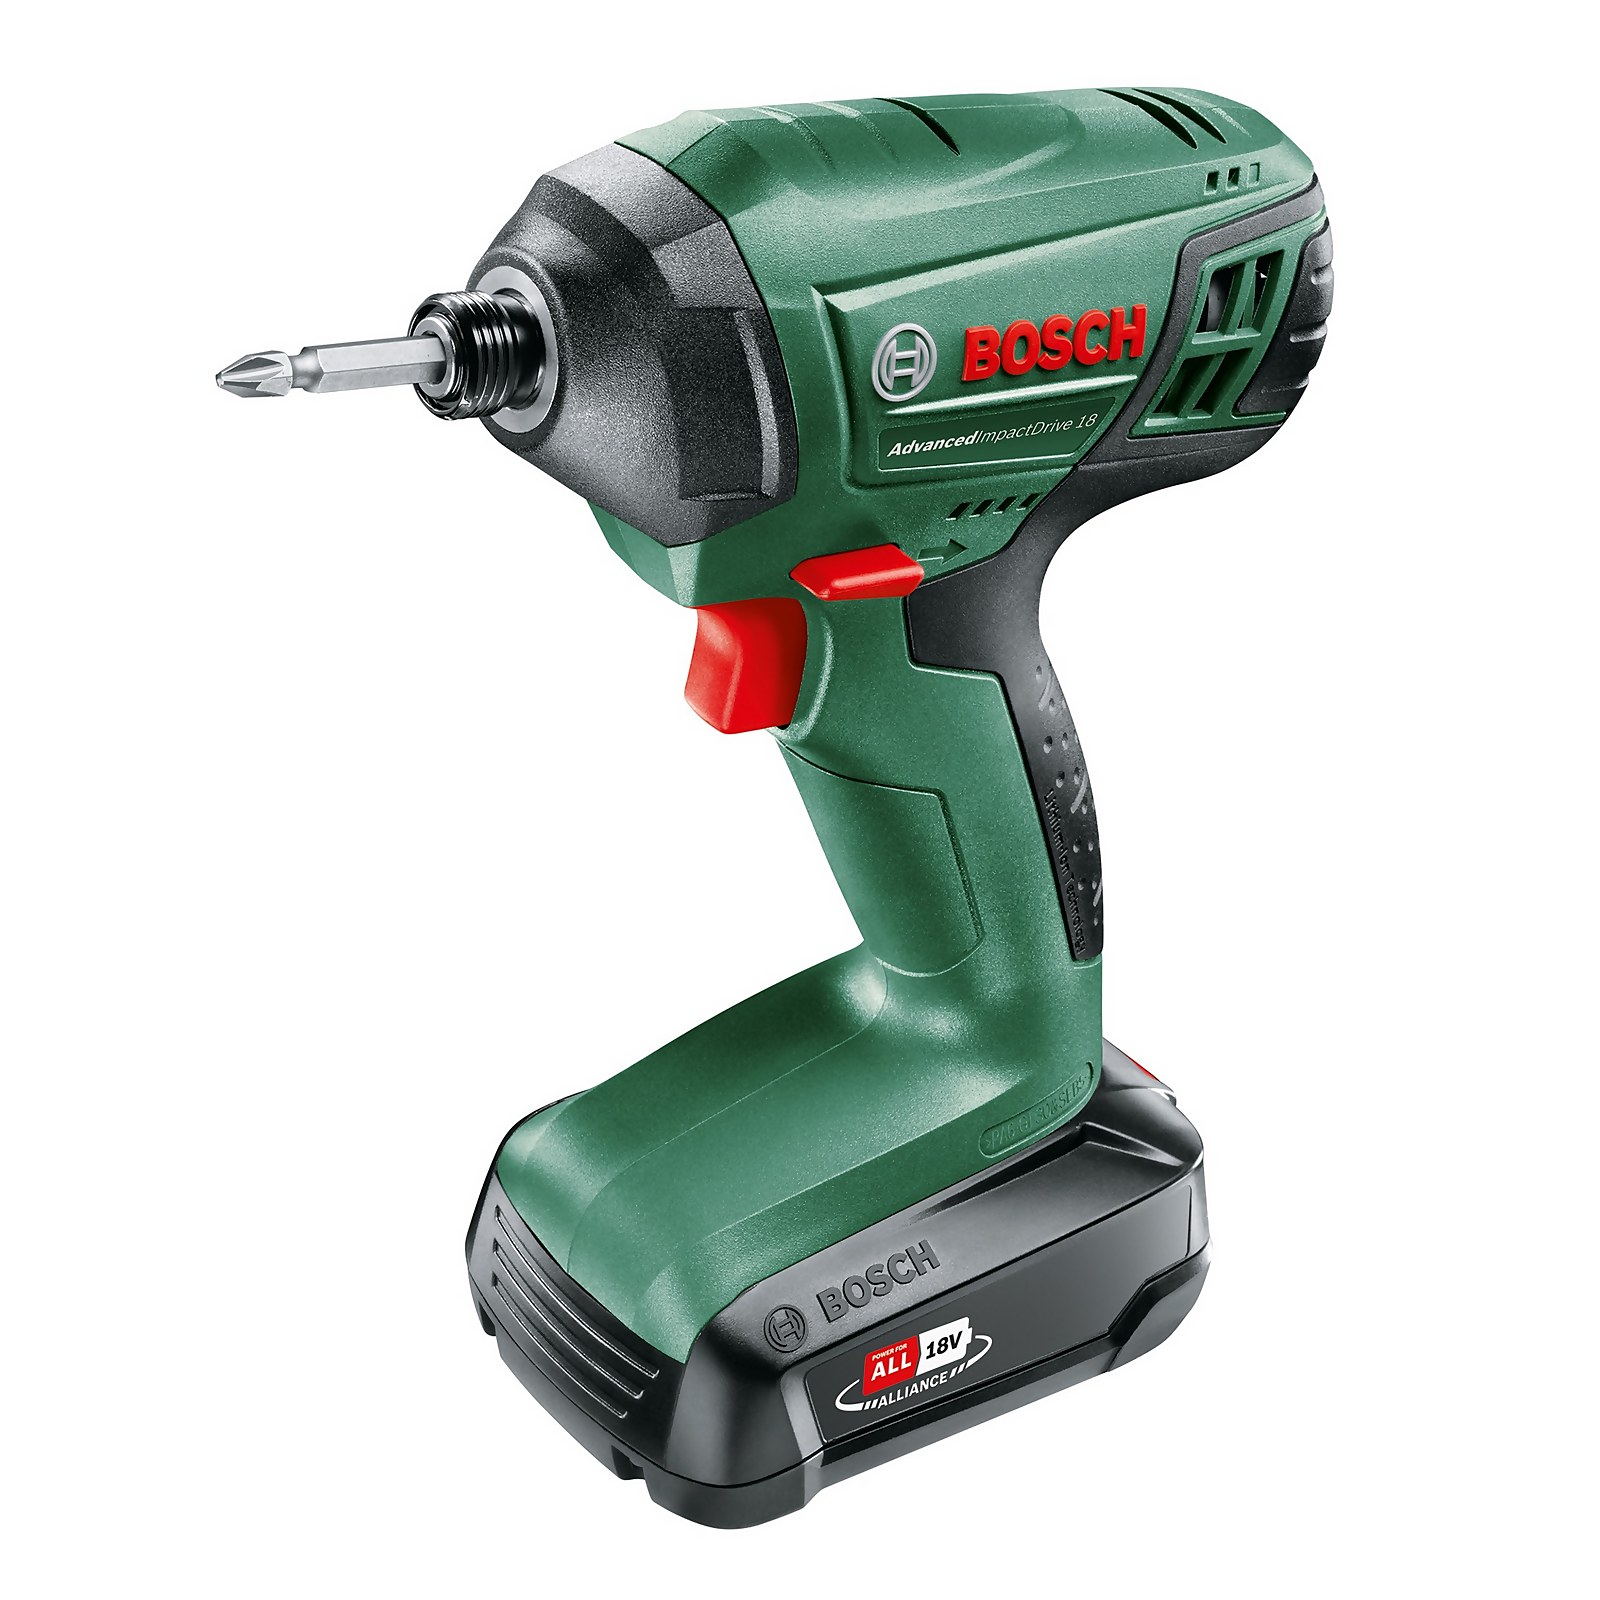 Photo of Bosch Advancedimpactdrive 18 Impact Driver With 1 X 1.5 Ah Battery & Charger